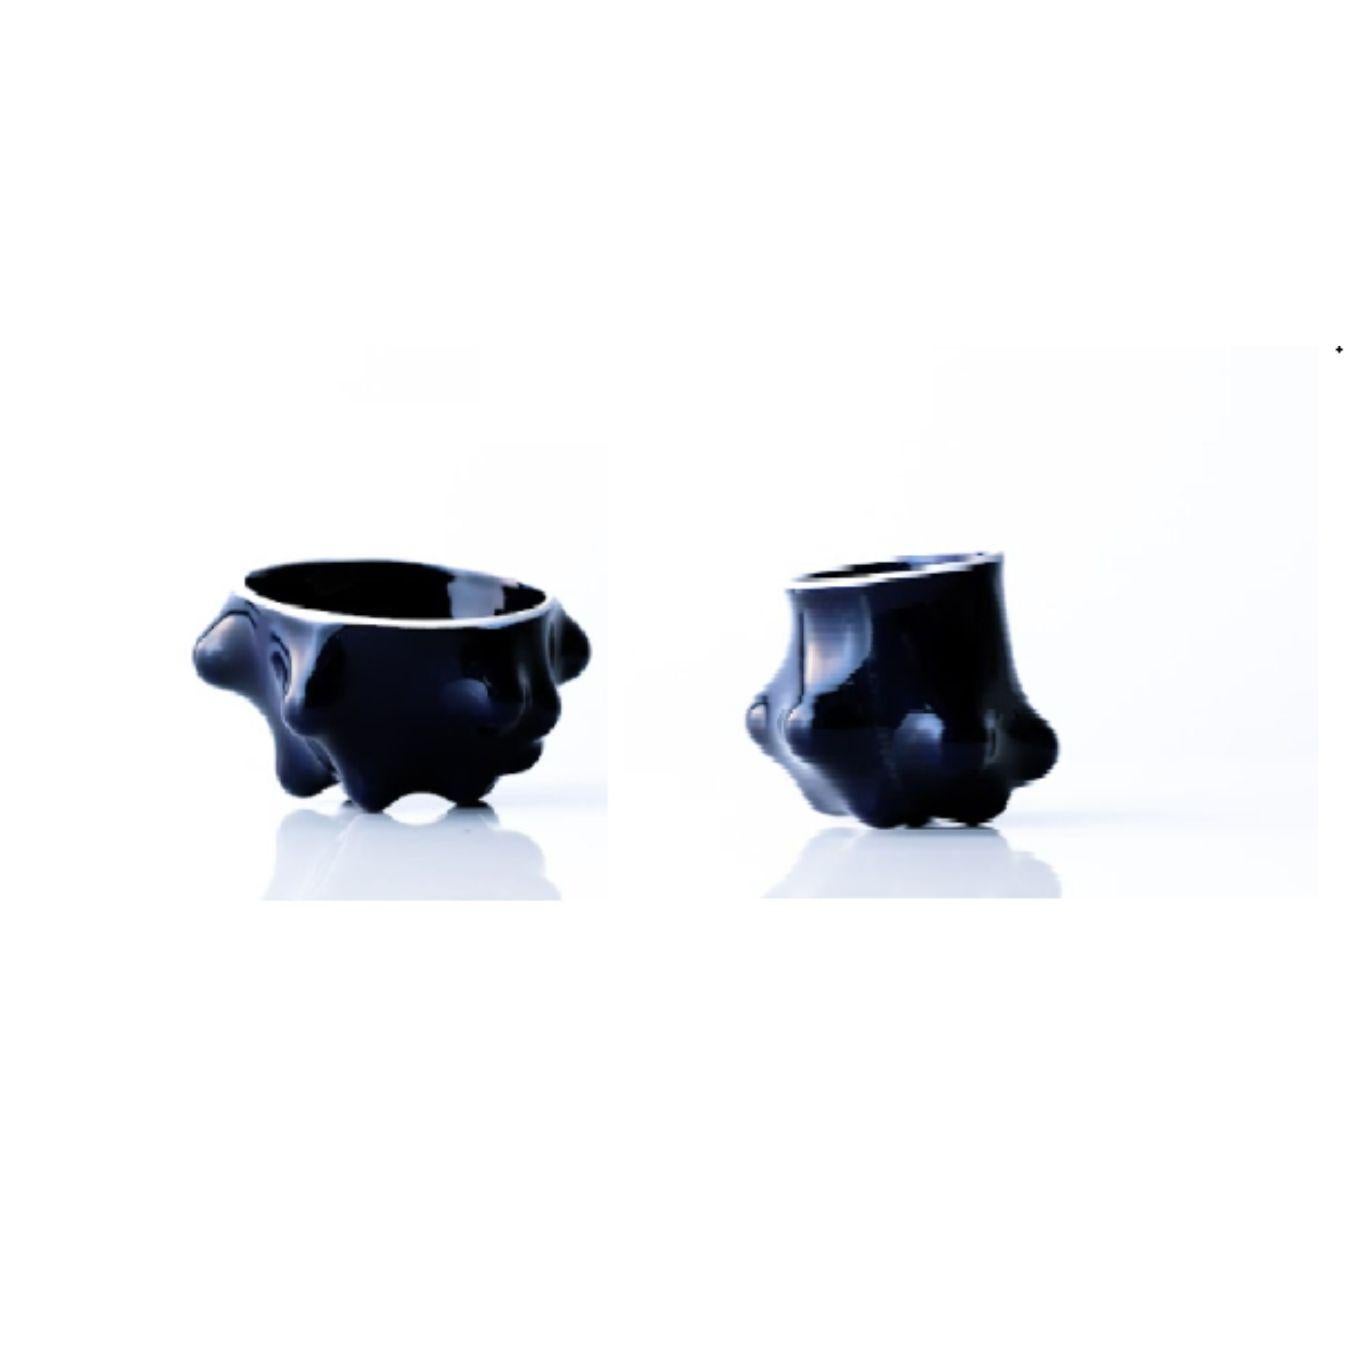 Set of 2 Arkadiusz Szwed Bumps 2.0 Bowl Cup by Nów
Designed by Arkadiusz Szwed
Dimensions: D 18 x W 18 x H 10 cm
Materials: glazed porcelain, cobalt

BUMPS 2.0 is a set of ceramic objects that were created as a result of an experiment with a